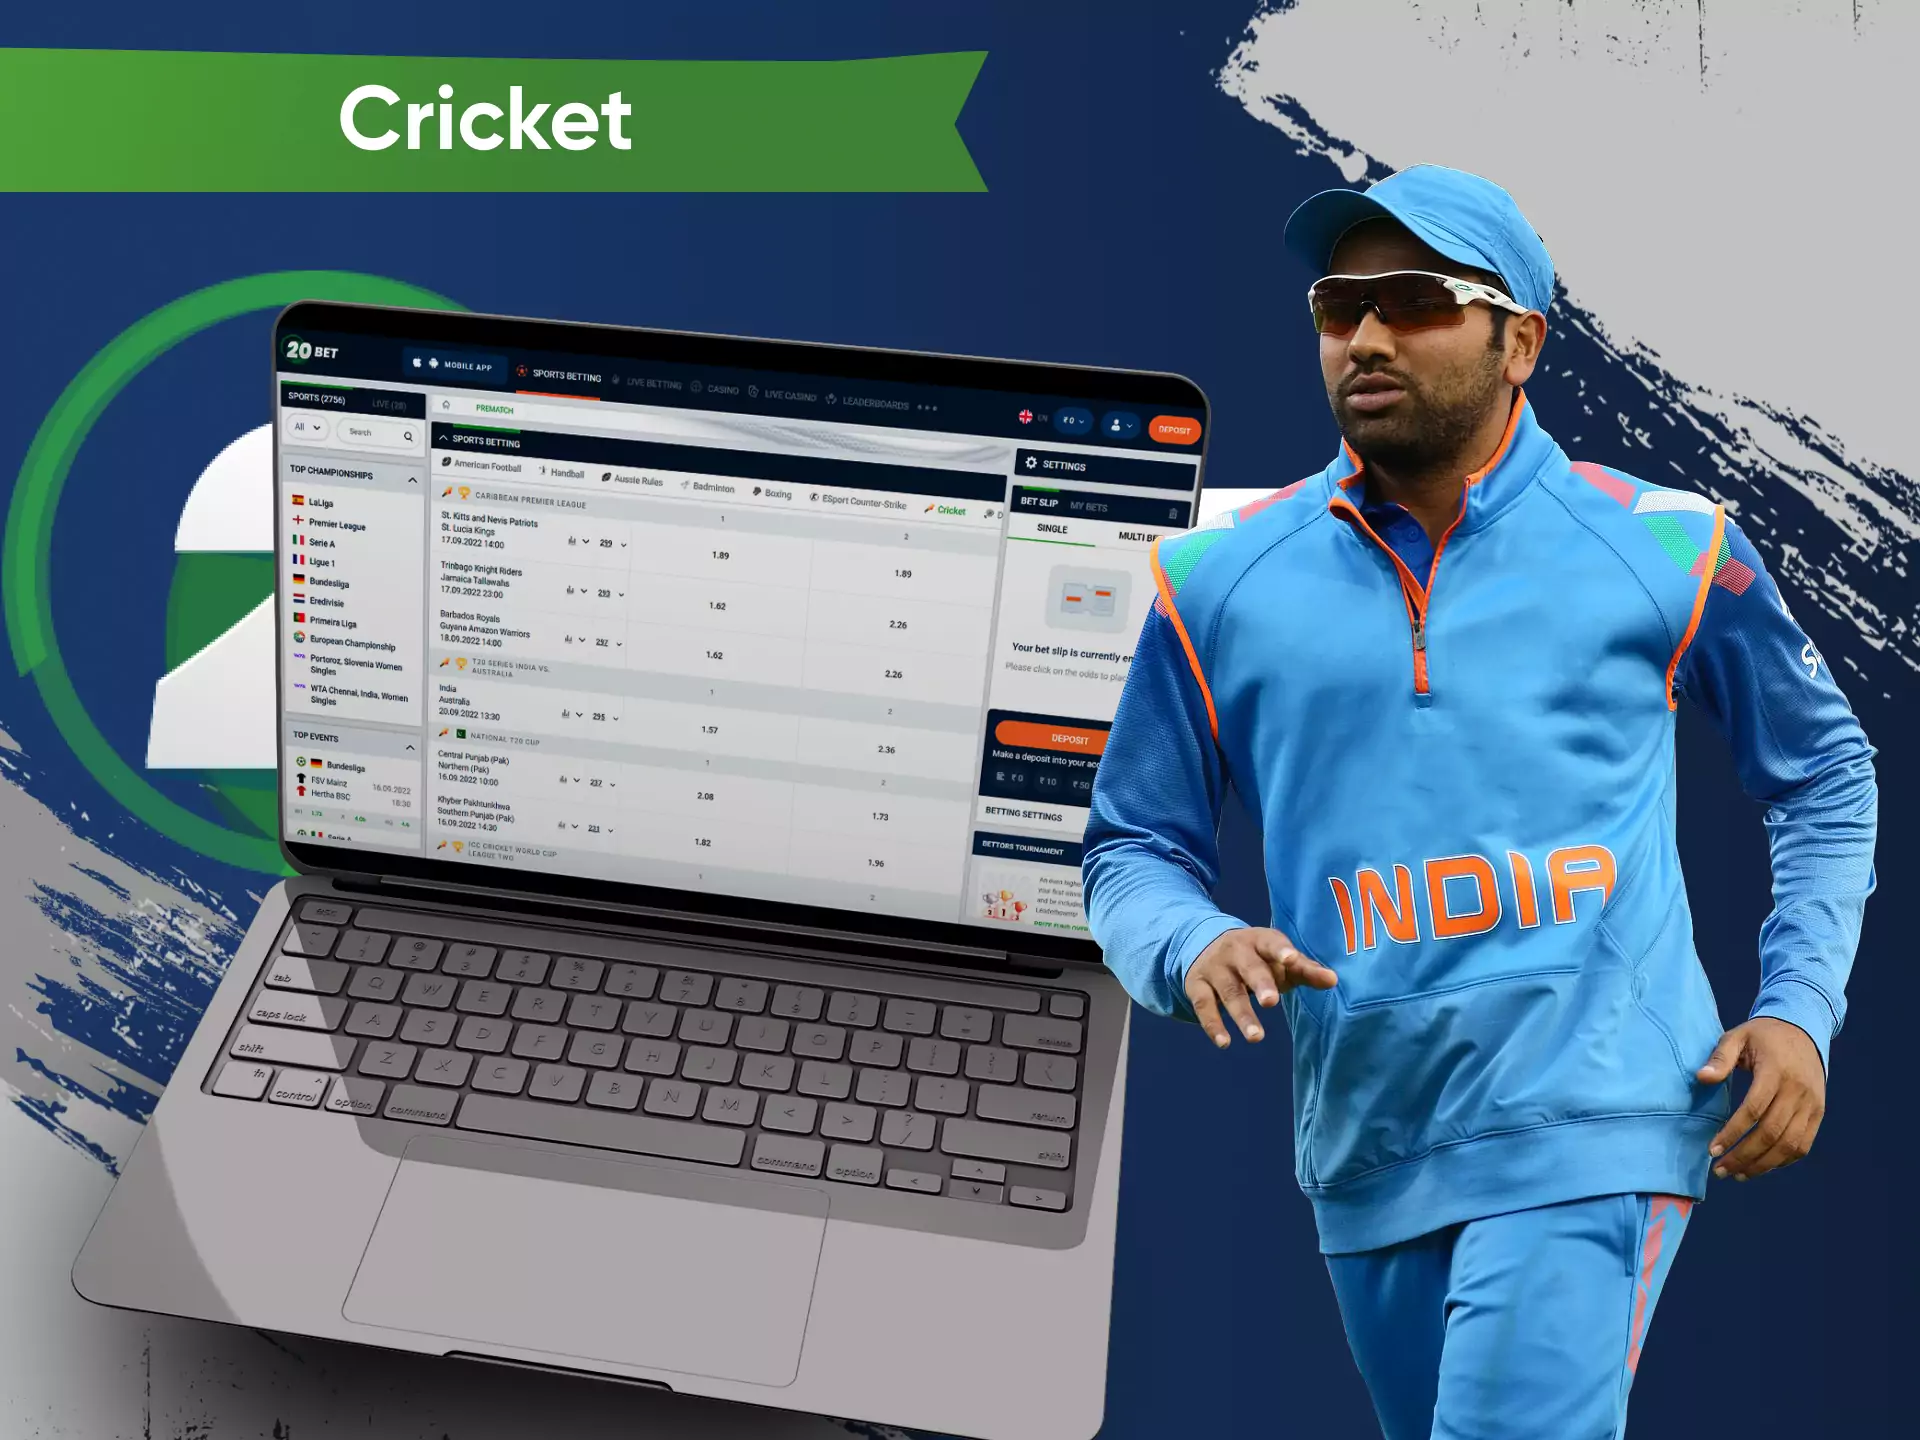 On 20bet, you can bet on cricket matches online.